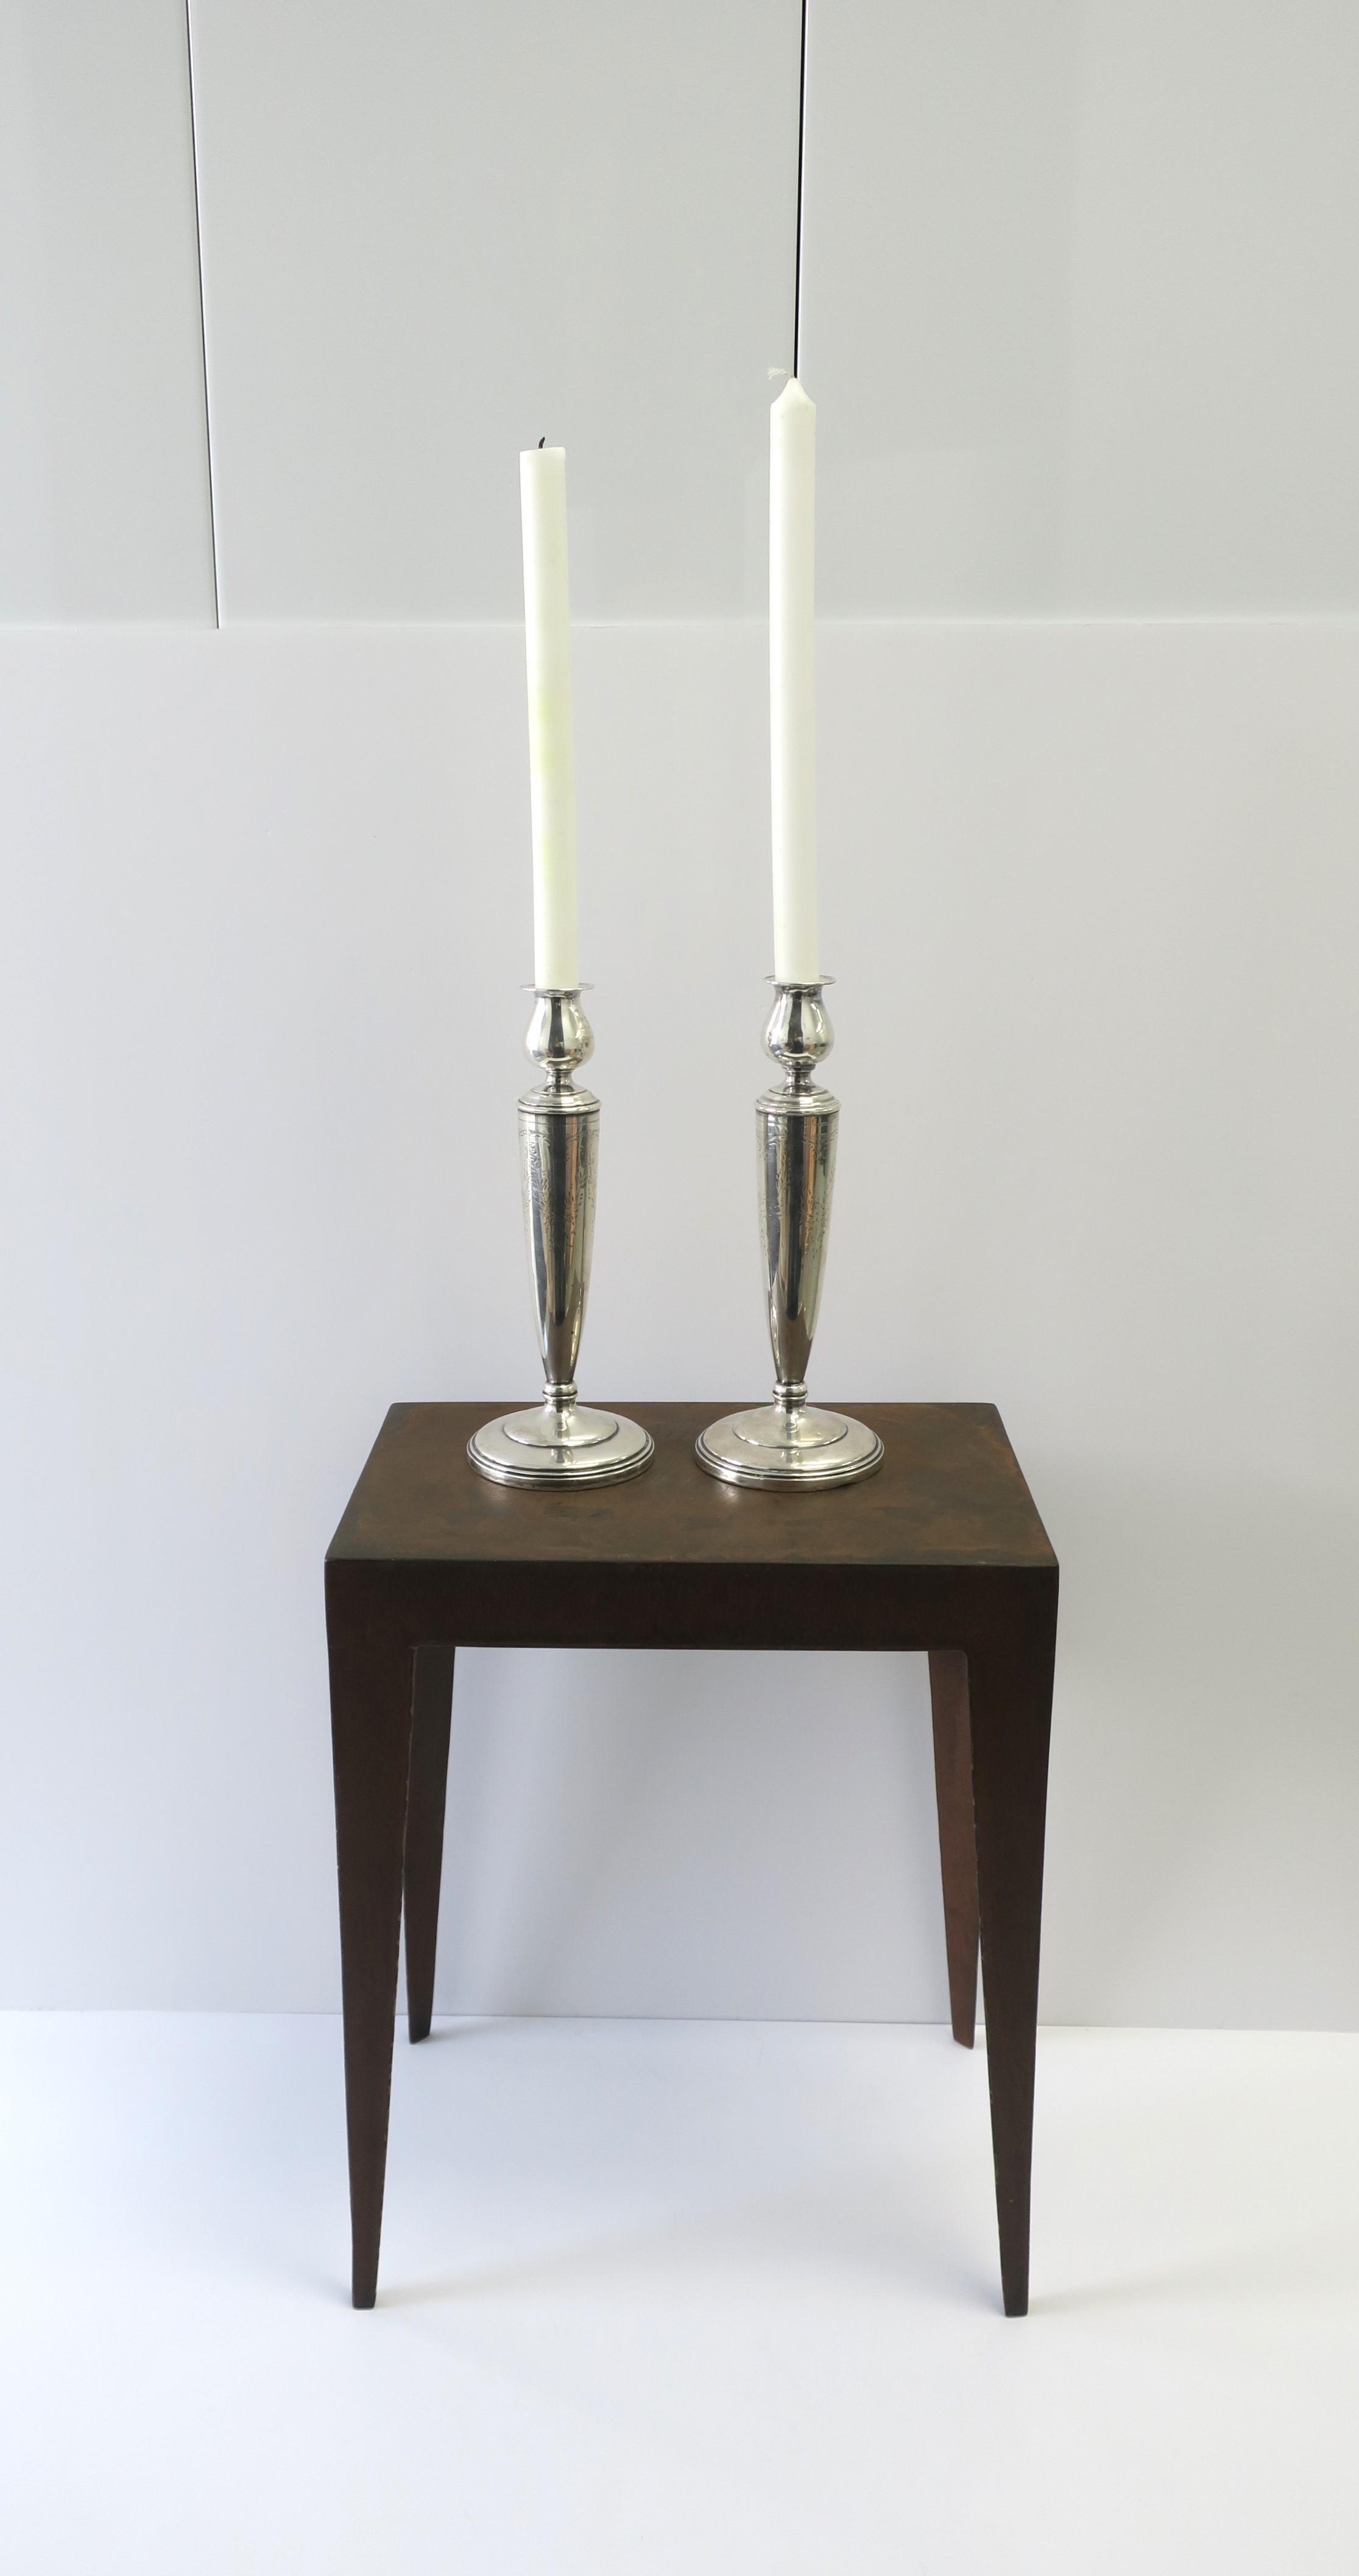 20th Century Sterling Silver Candlesticks, Pair